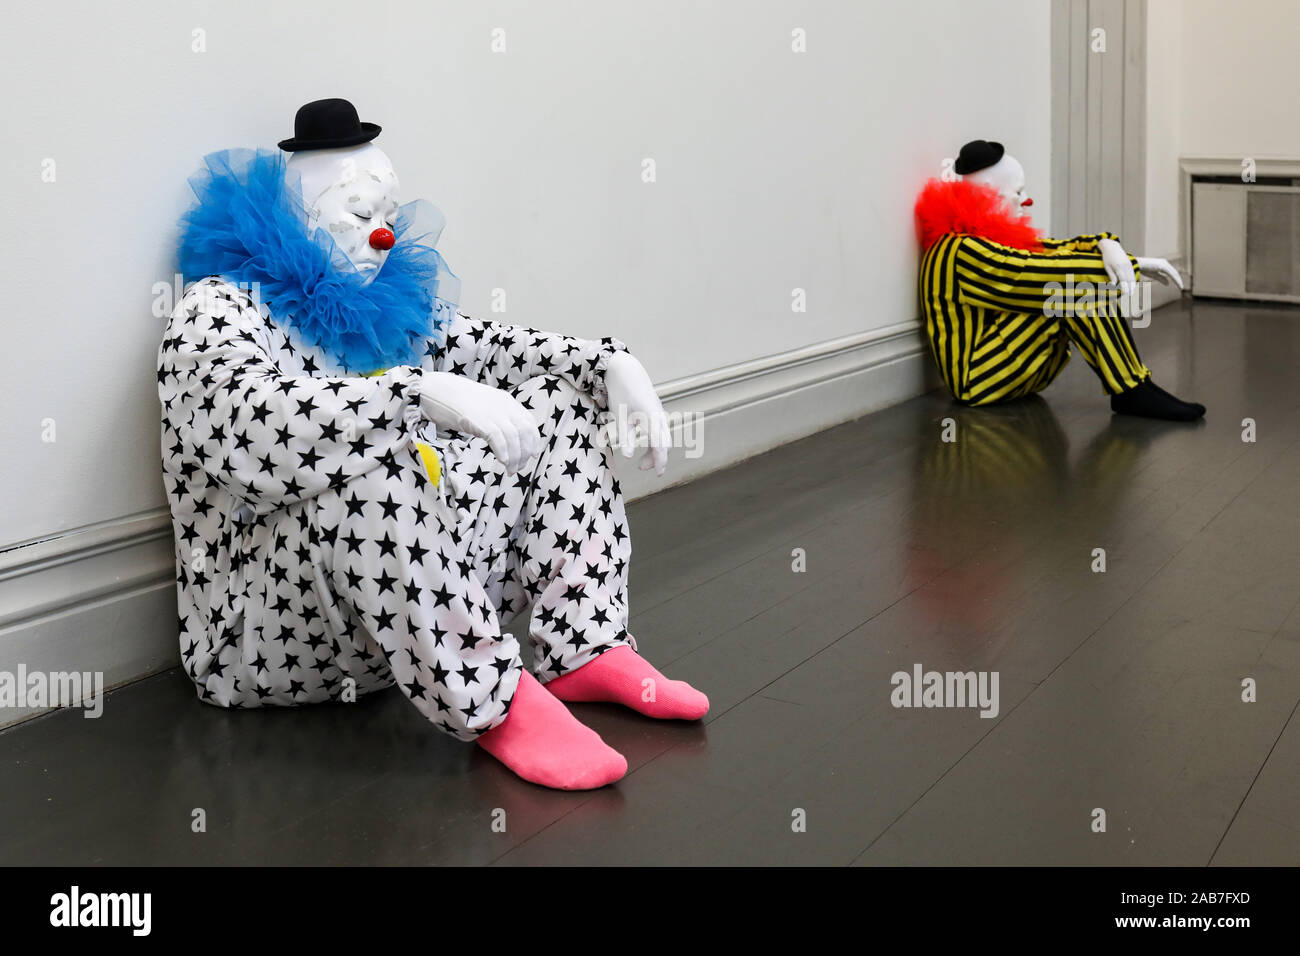 Hyper-realistic sculptured clowns at 'everyone gets lighter' or 'vocabulary of solitude' art exhibition in Helsinki, Finland Stock Photo